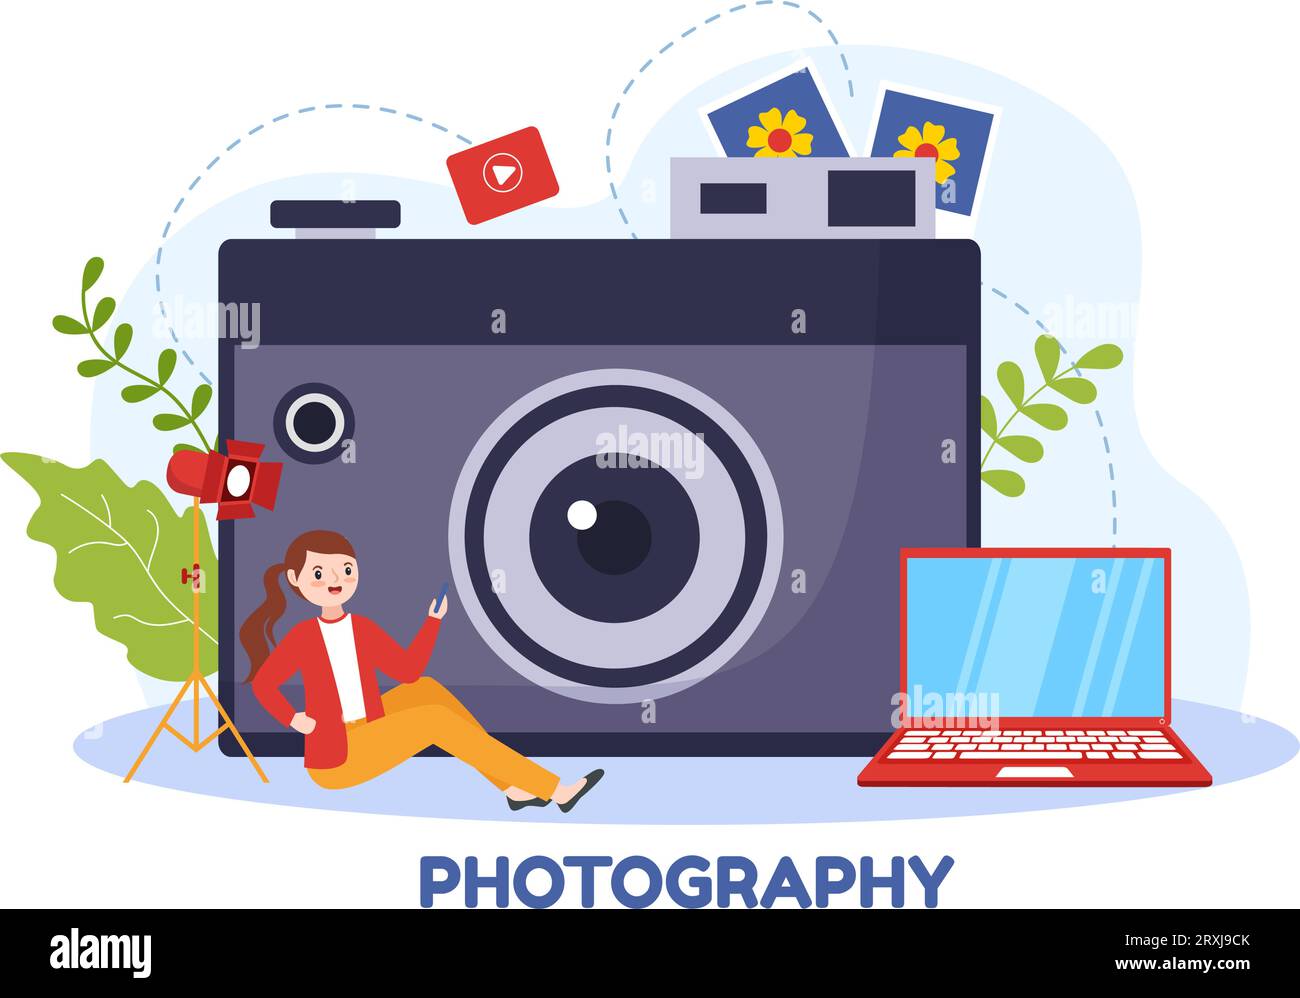 Photography Vector Illustration with Camera and Equipment to Capture Travel, Tourism, Adventure and Memories in a Flat Cartoon Background Design Stock Vector